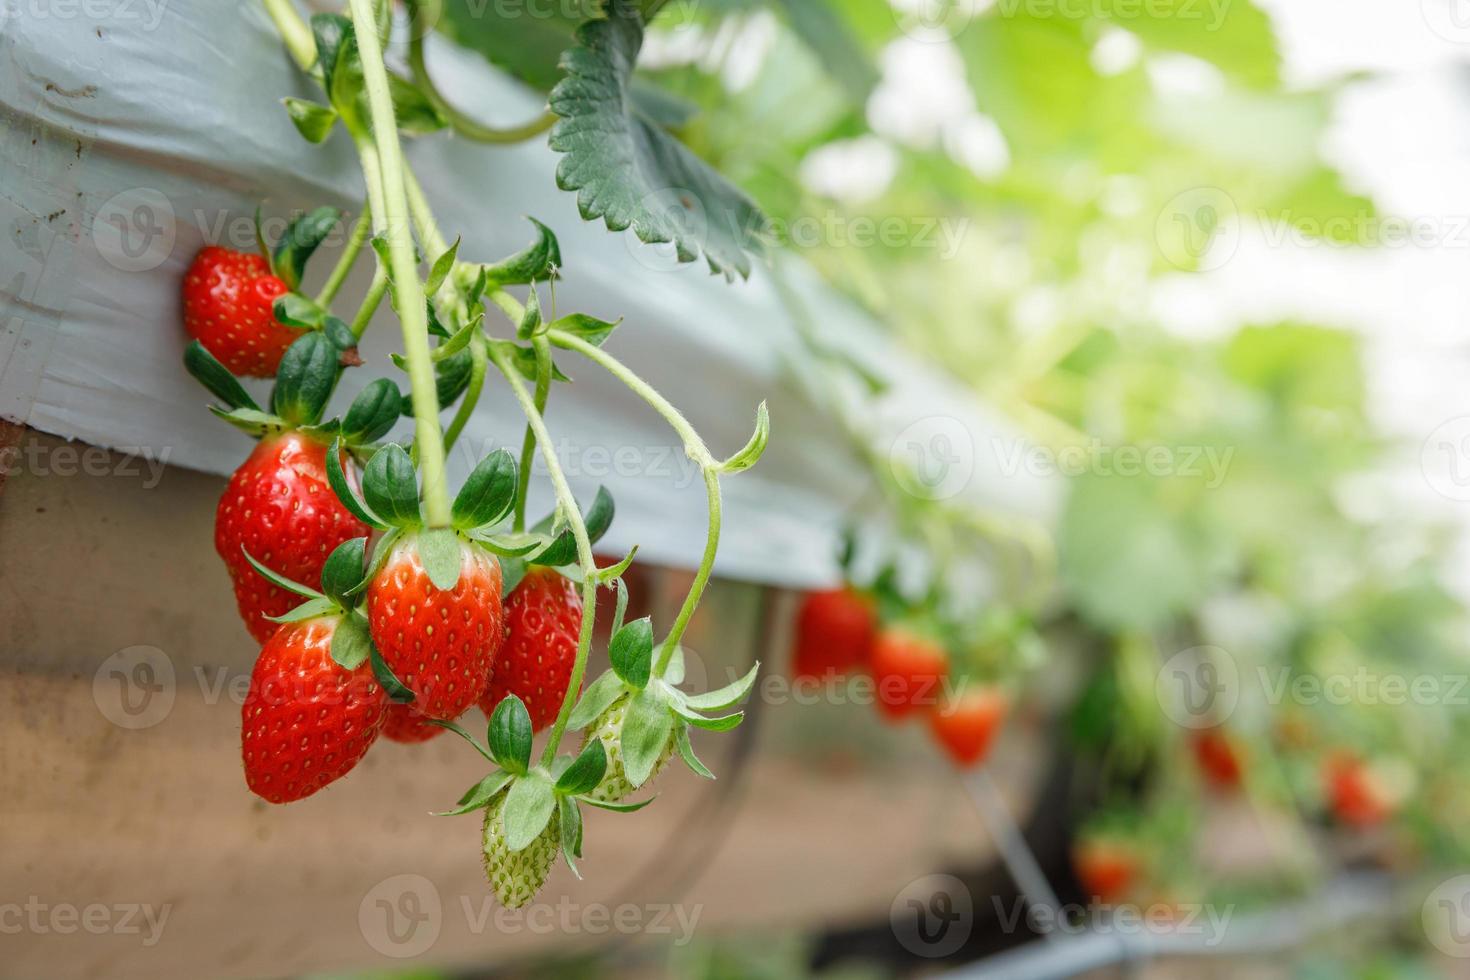 The hydroponics strawberry at greenhouse hydroponics farm with high technology farming in close system photo